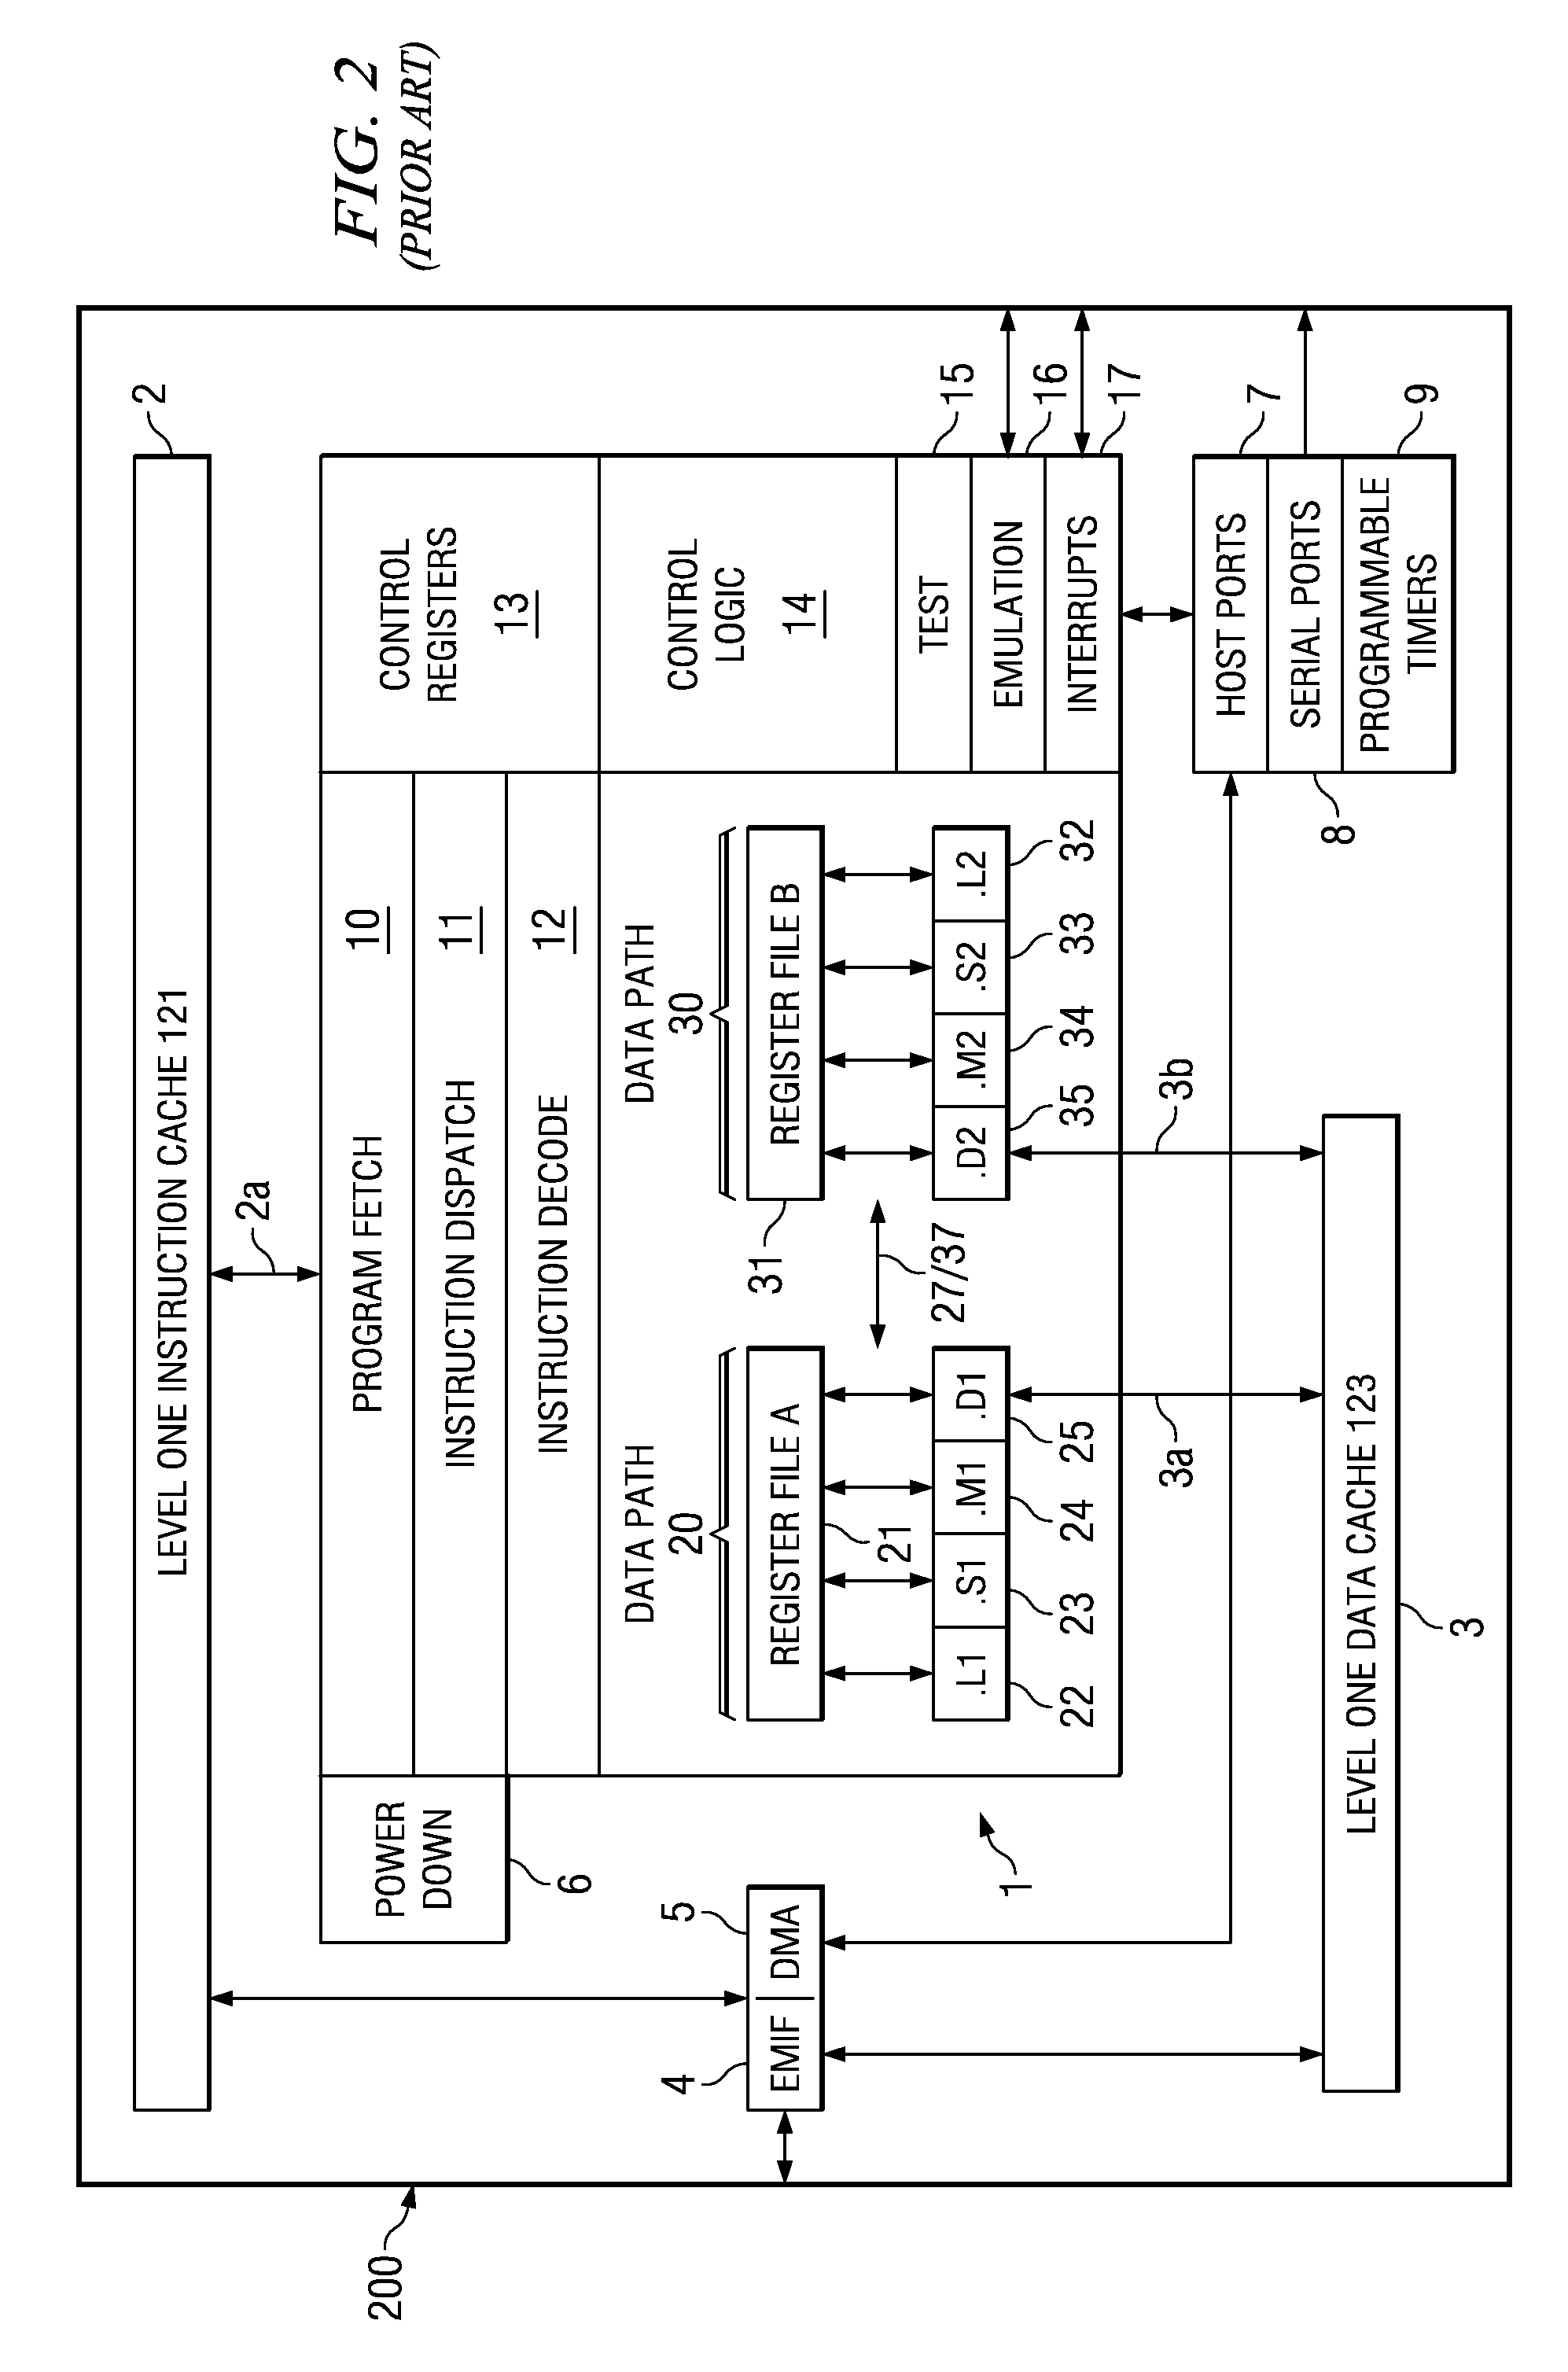 Method of CABAC Coefficient Magnitude and Sign Decoding Suitable for Use on VLIW Data Processors